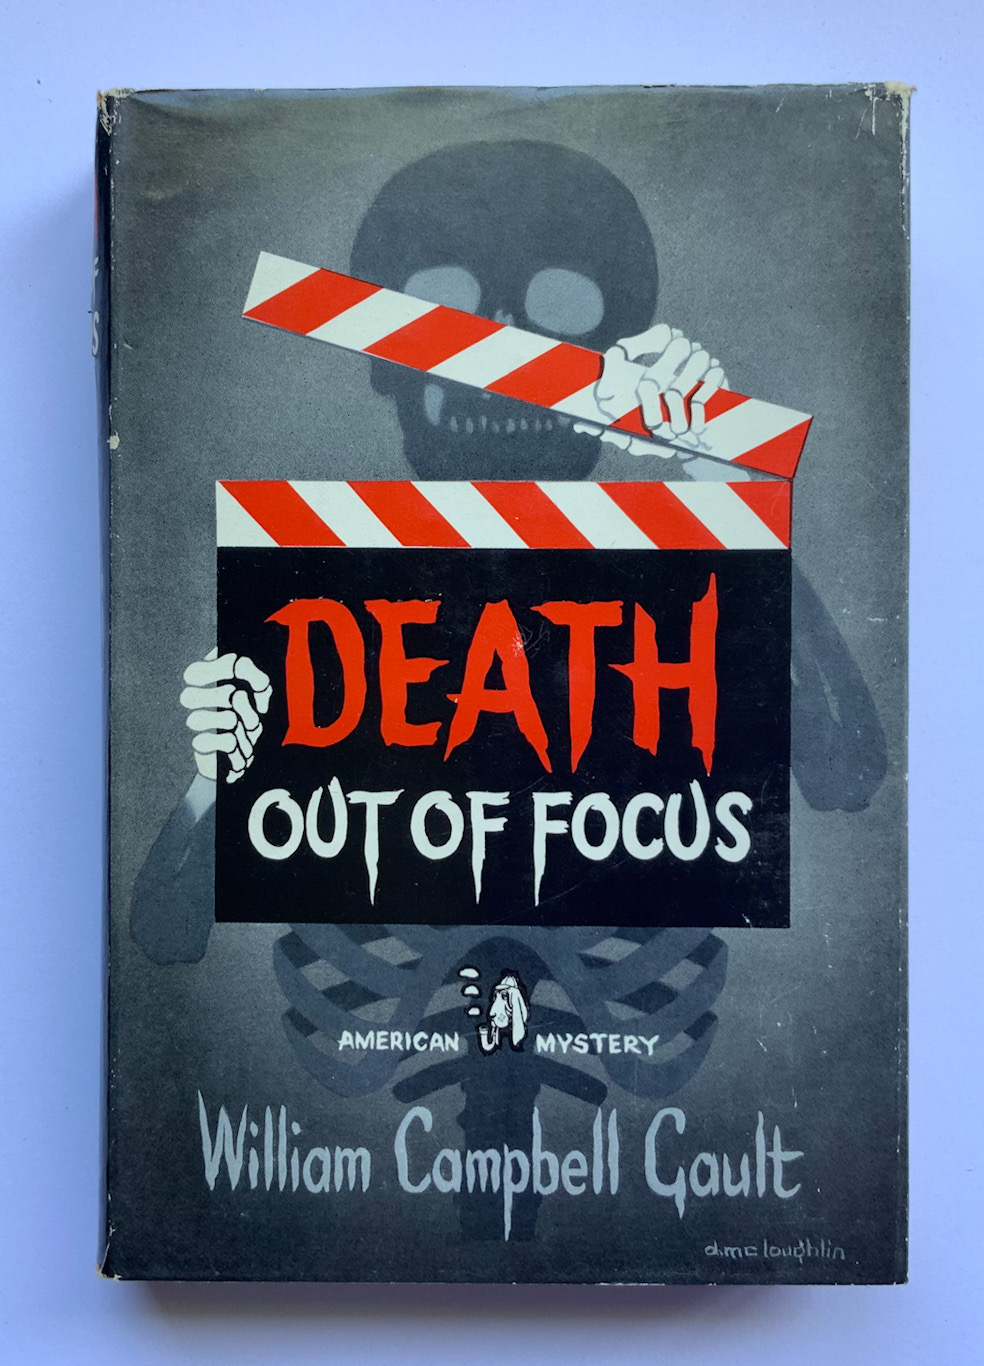 DEATH OUT OF FOCUS British crime book by William Campbell Gault 1959 1st edition